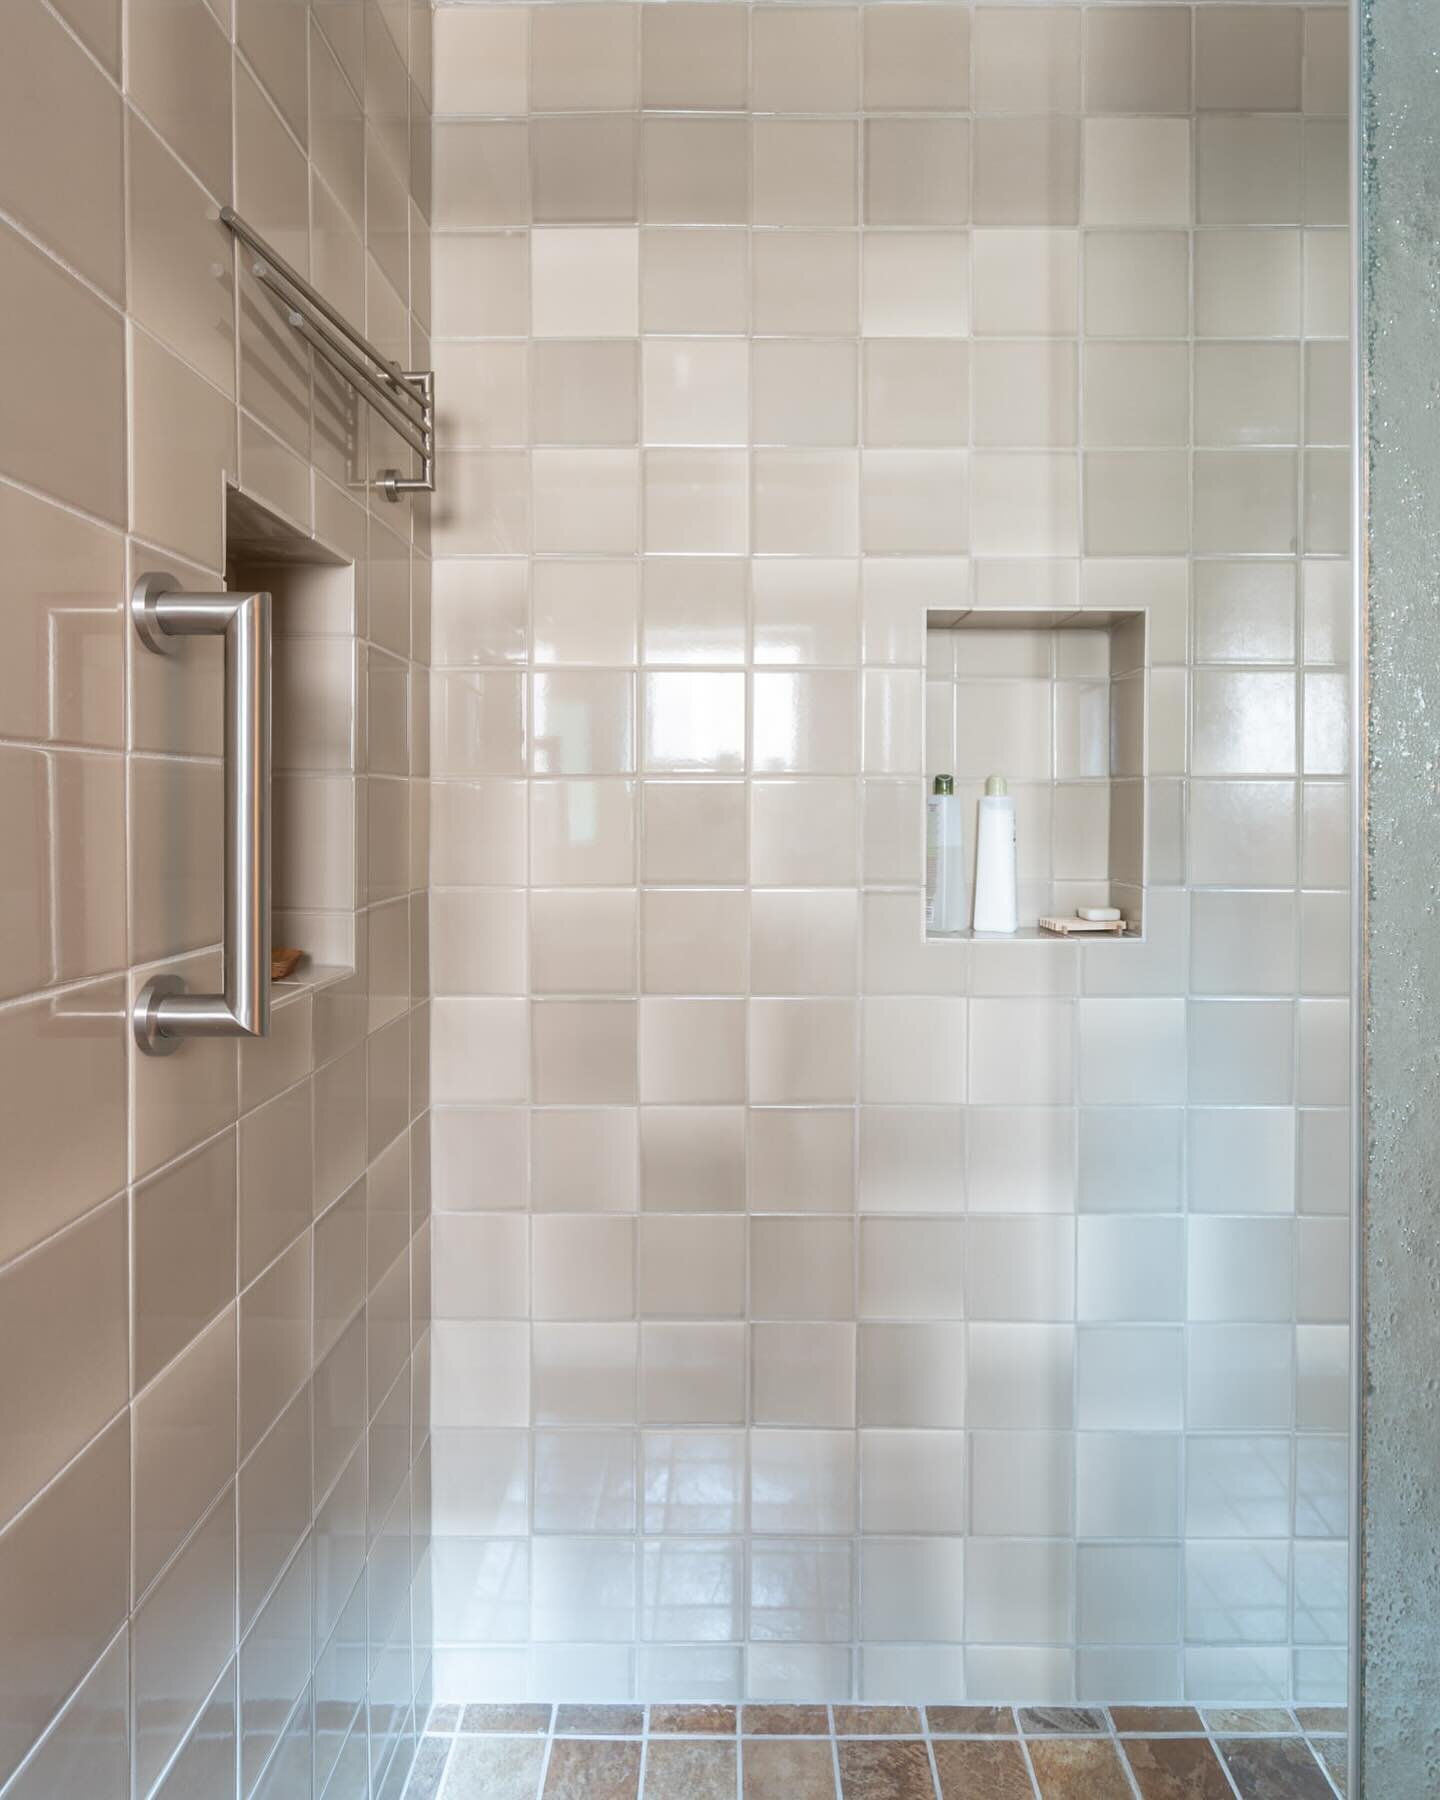 What a perfect taupe gray!!!! I love how our T51 Fog glaze shows the glazers edging creating lovely ombr&eacute; like tile. #deserthome #bathdesign #taupetile 
Design @originatenaturalbuilding 
Photo @loganhavens